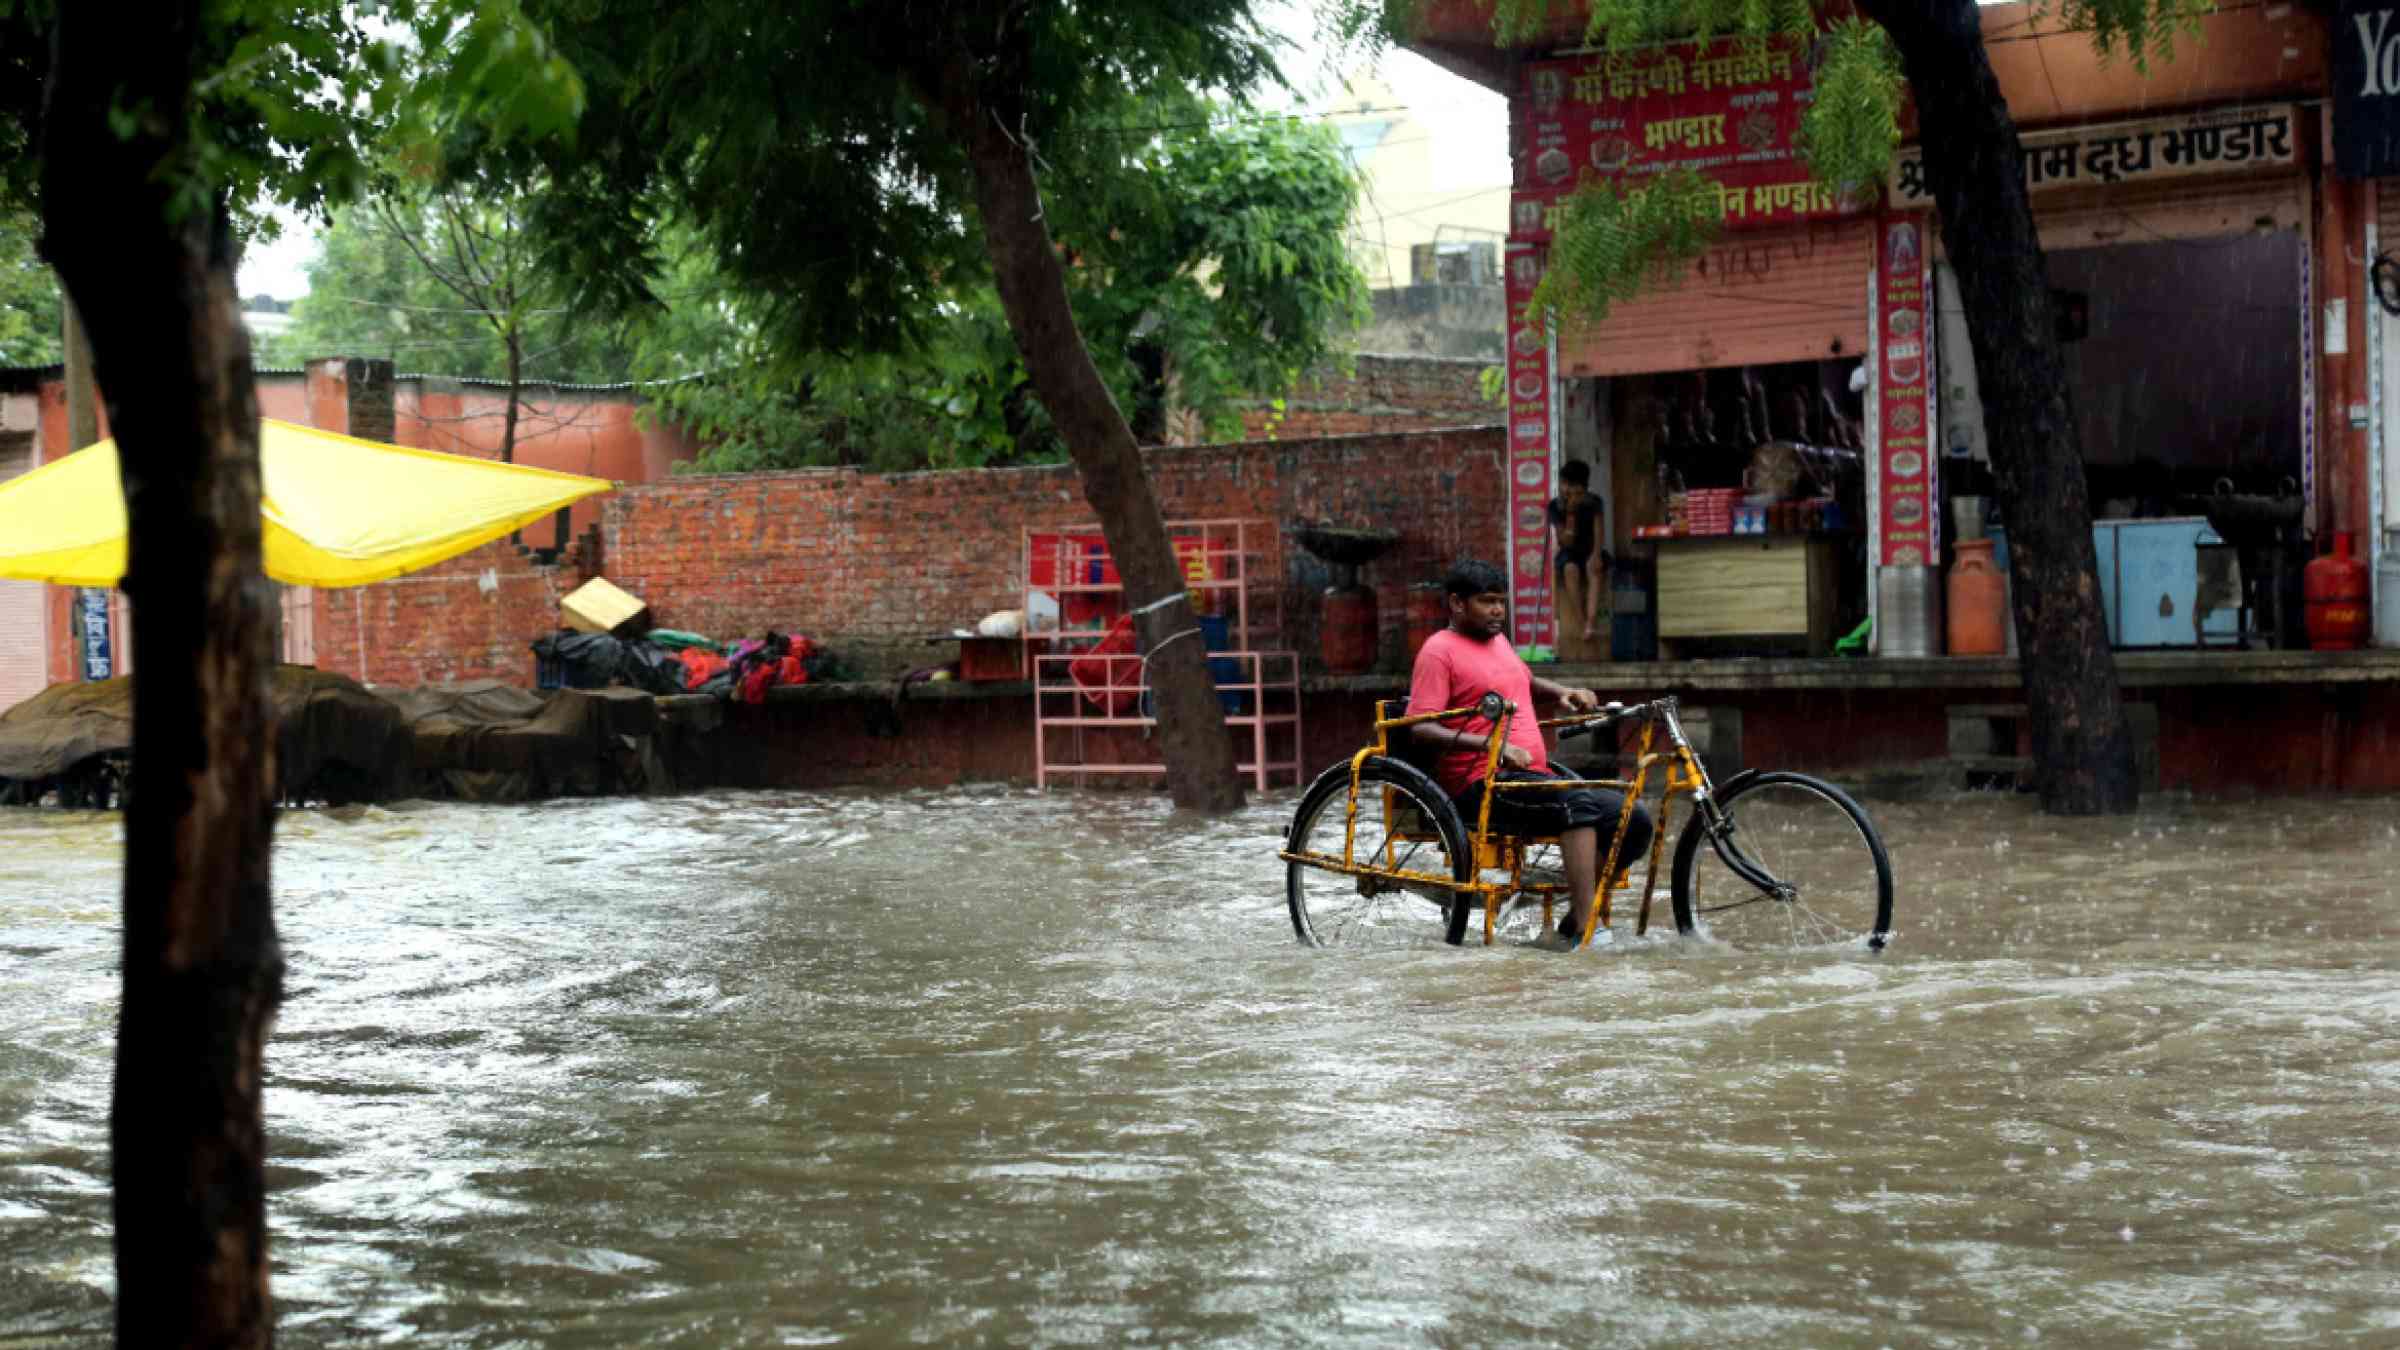 A disabled man wading through water logged road on his tricycle in India, 2020